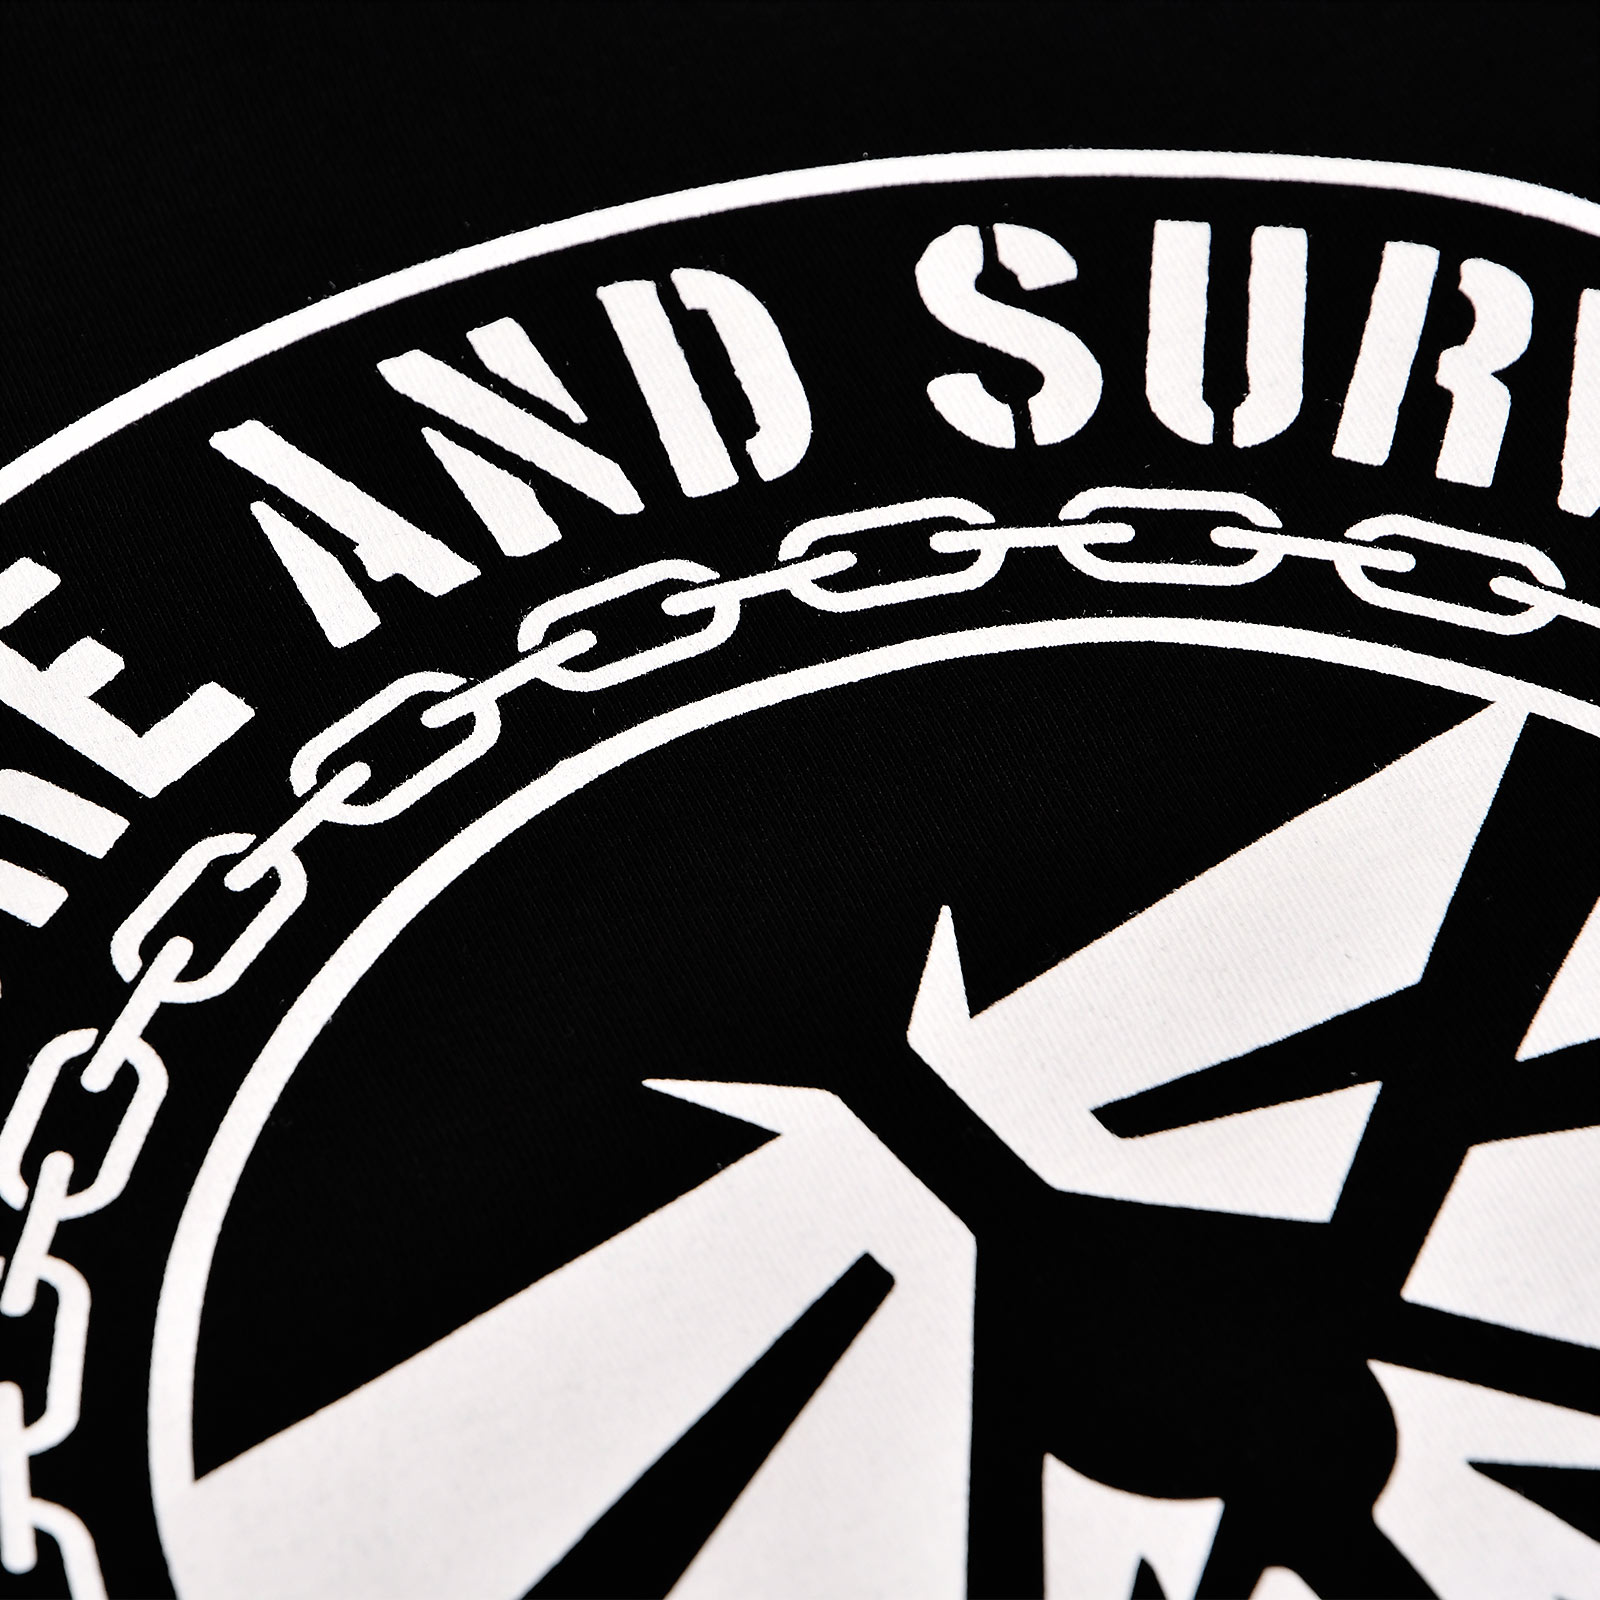 Endure and Survive T-Shirt for The Last of Us Fans black